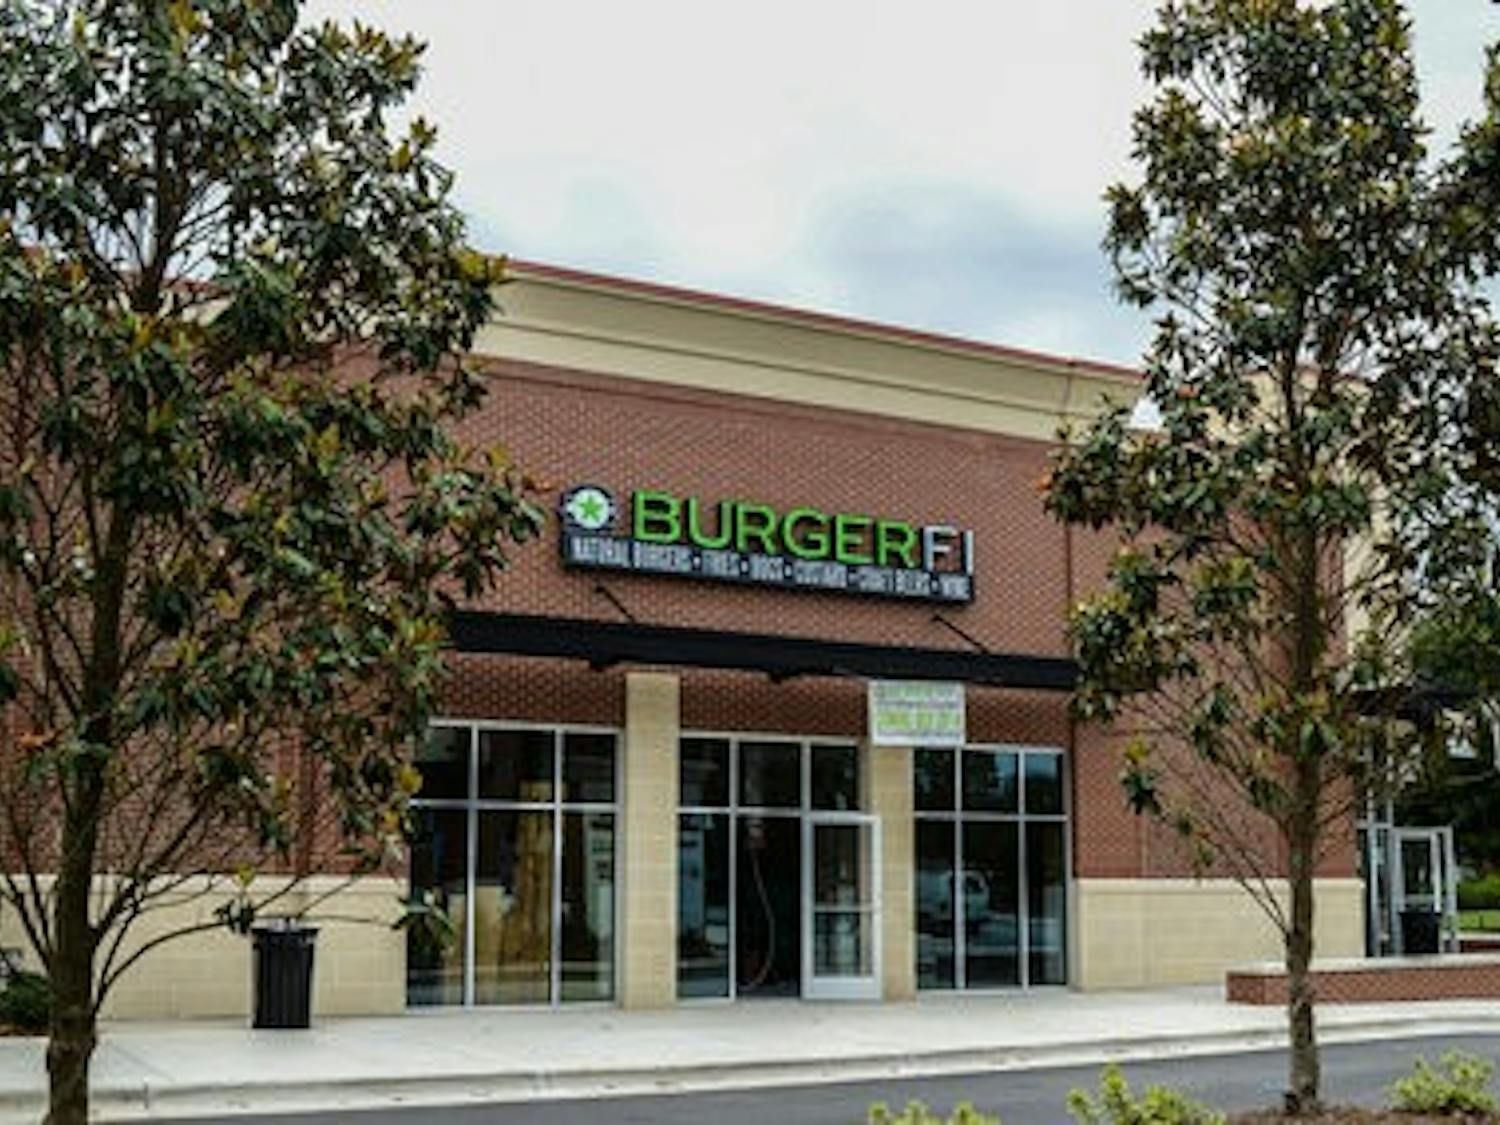 BurgerFi and Uncle Maddio's offer locals healthy food options in new shopping center